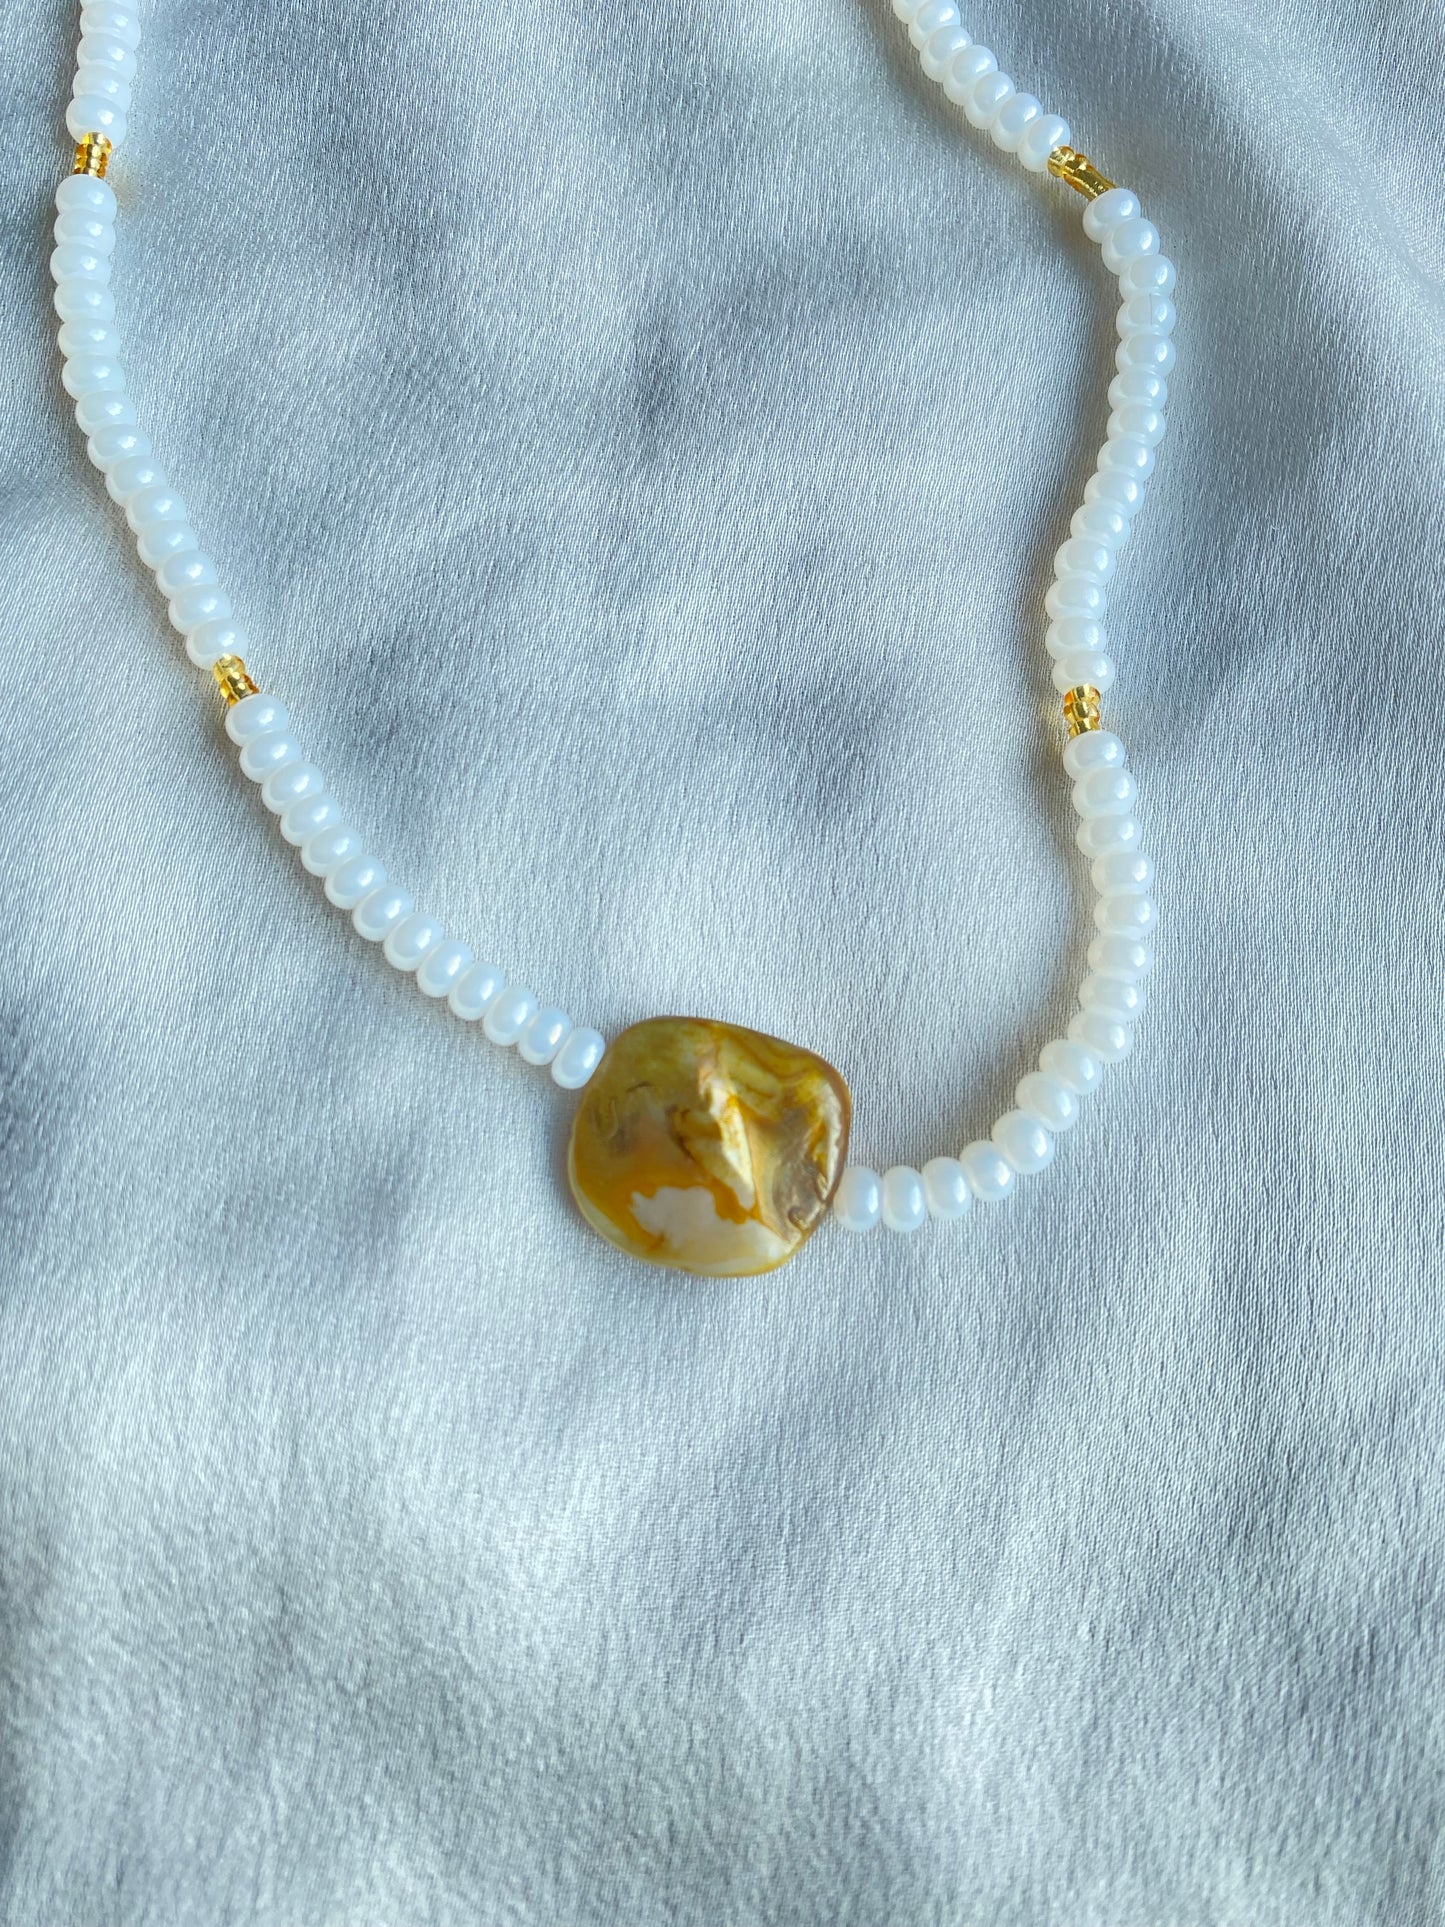 Tranquility Pearl necklace